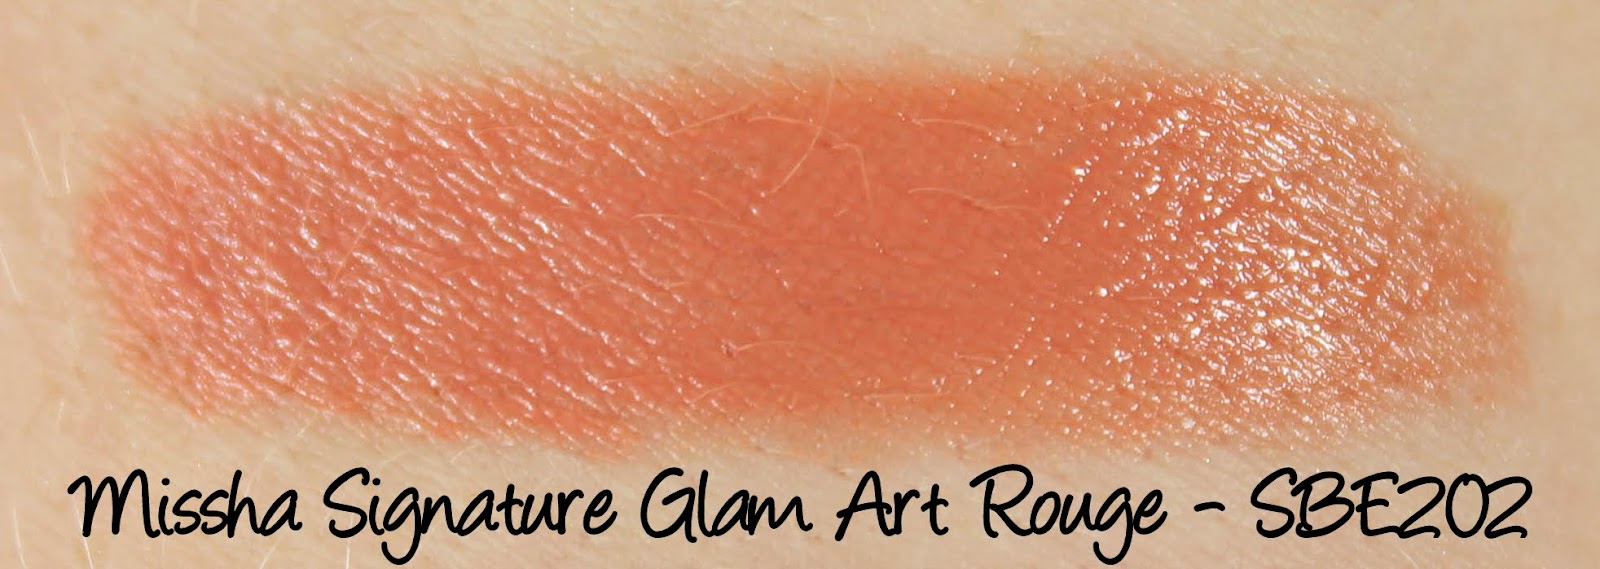 Missha Signature Glam Art Rouge - SBE202 Lipstick Swatches & Review